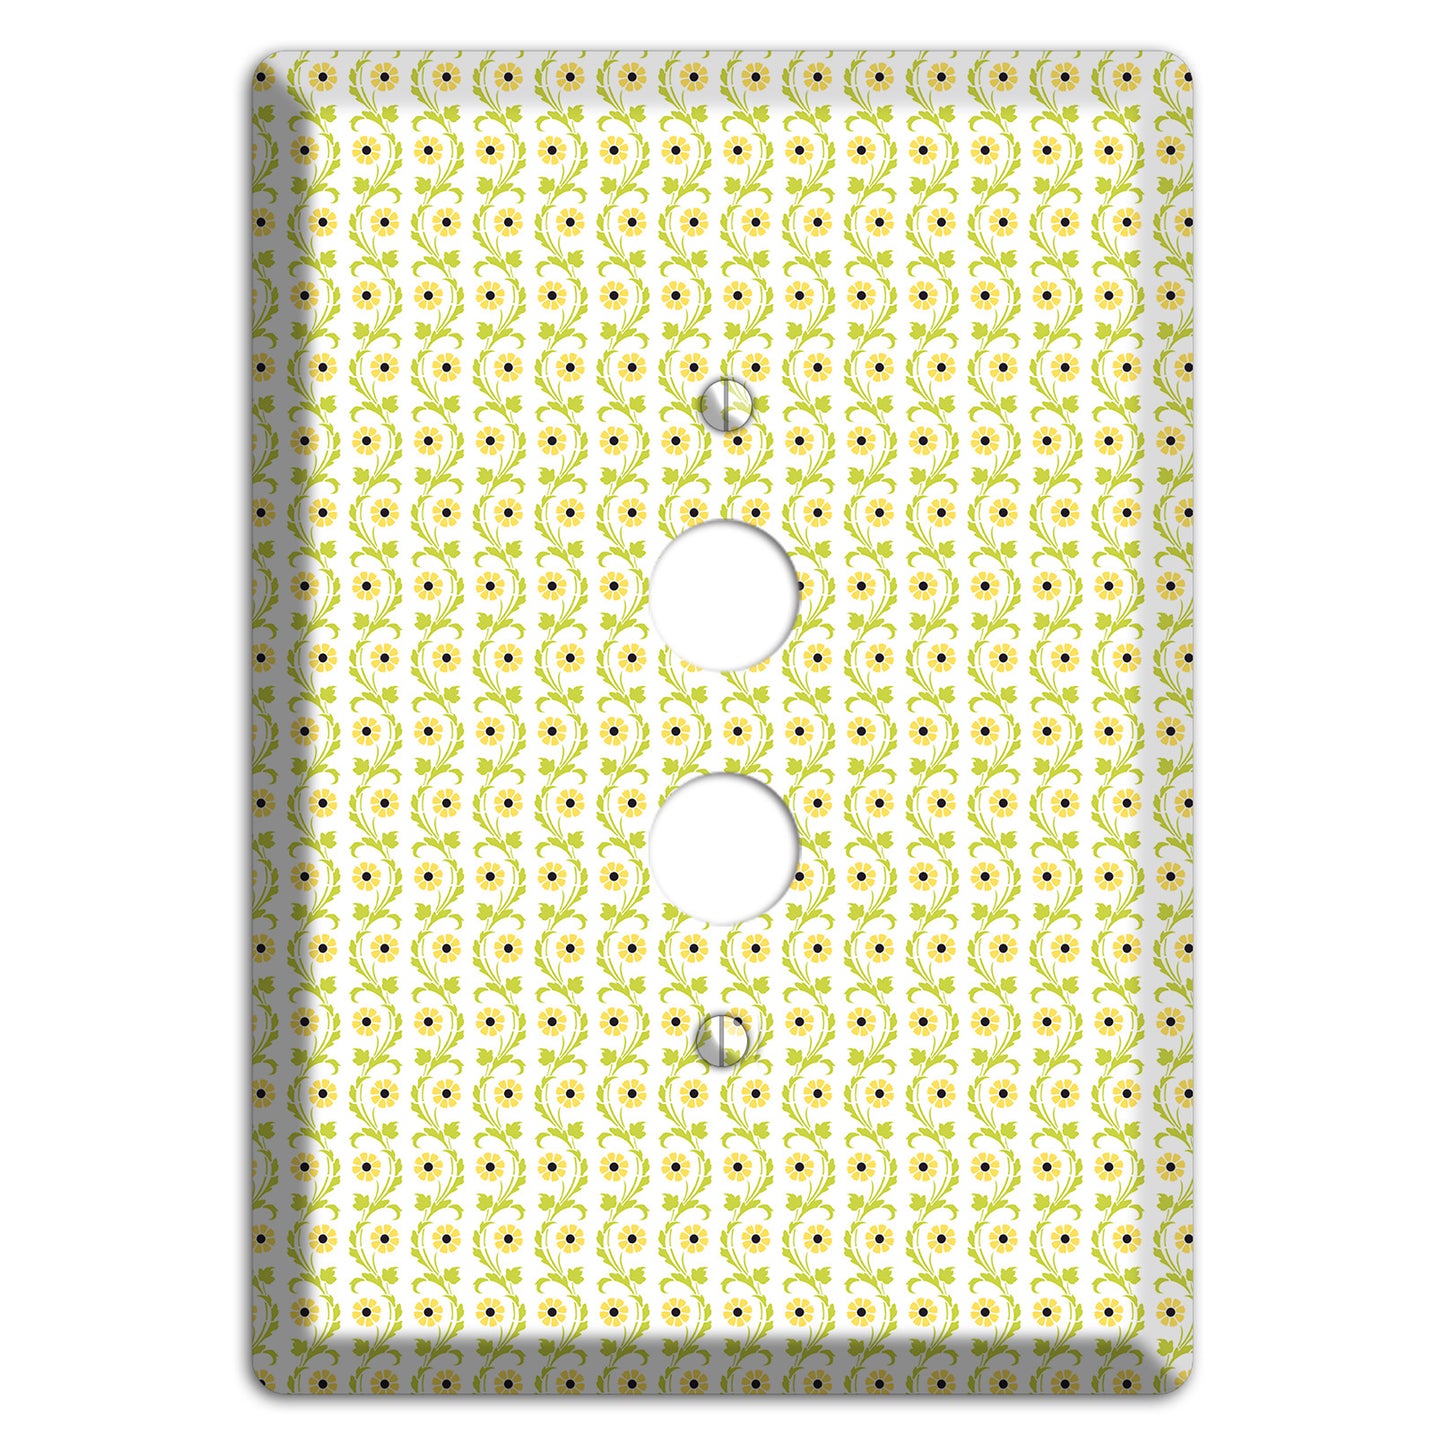 Tiny Yellow and Green Retro Sprig 1 Pushbutton Wallplate